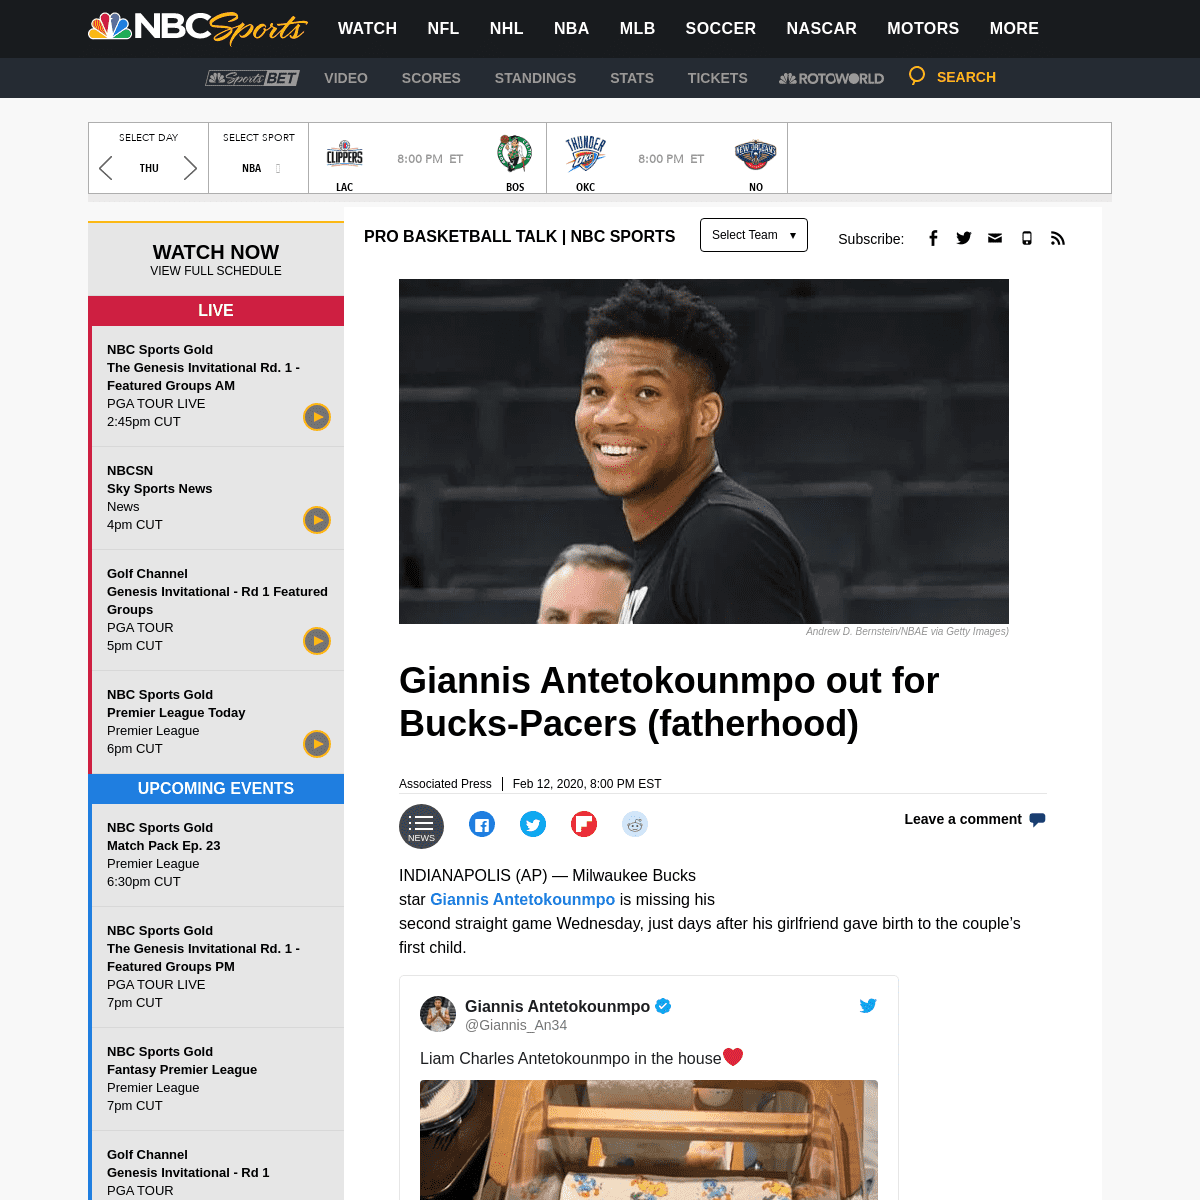 A complete backup of nba.nbcsports.com/2020/02/12/giannis-antetokounmpo-out-for-bucks-pacers-fatherhood/